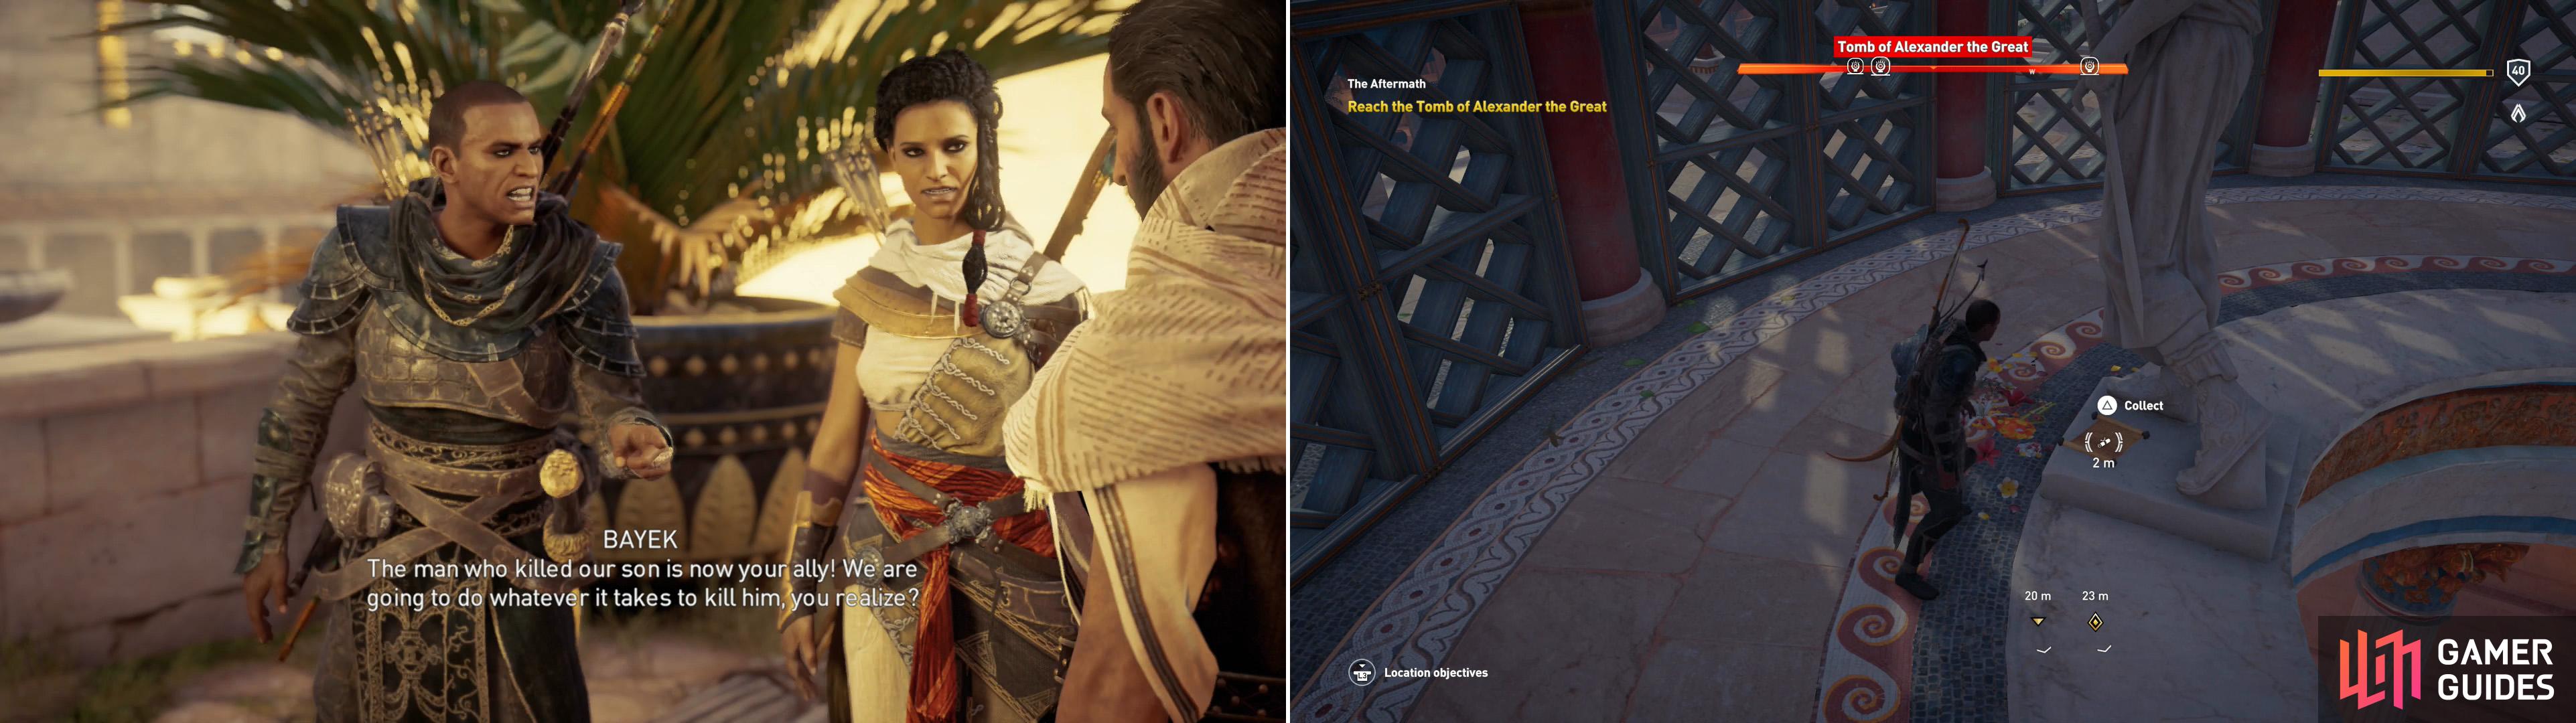 After being snubbed by Cleopatra, Aya and Bayek will vent their frustration on Apollodorus (left). Grab the "Ray of Hope" Papyrus Puzzle scroll from the Tomb of Alexander (right).